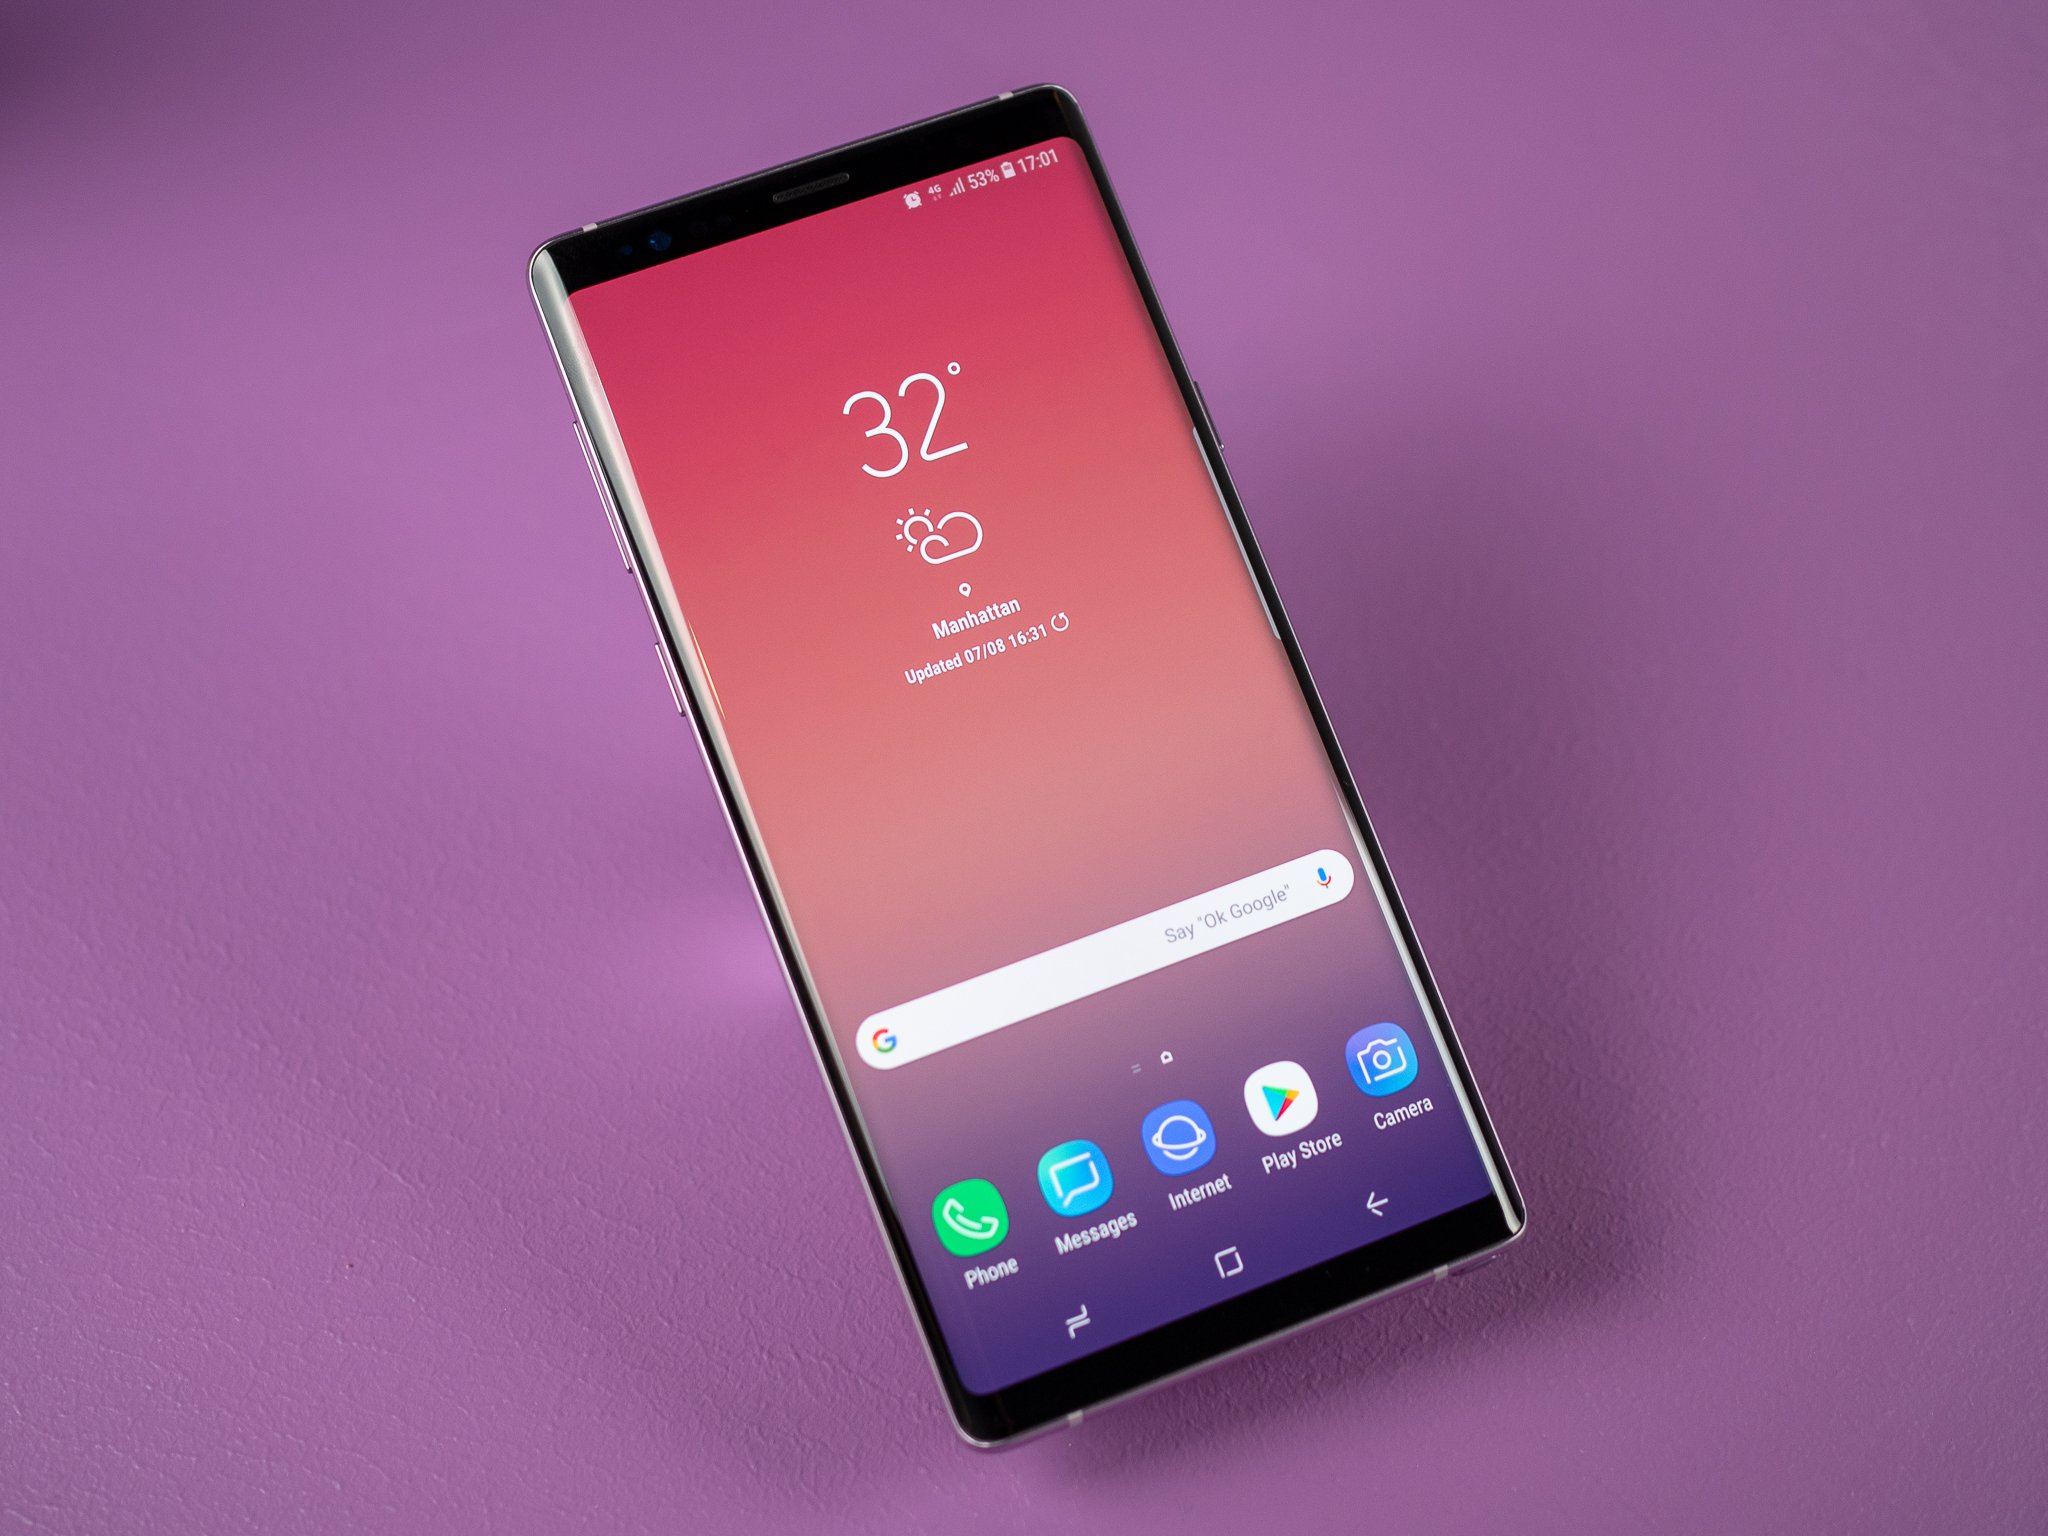 Galaxy Note 9's screen receives record-setting rating from DisplayMate